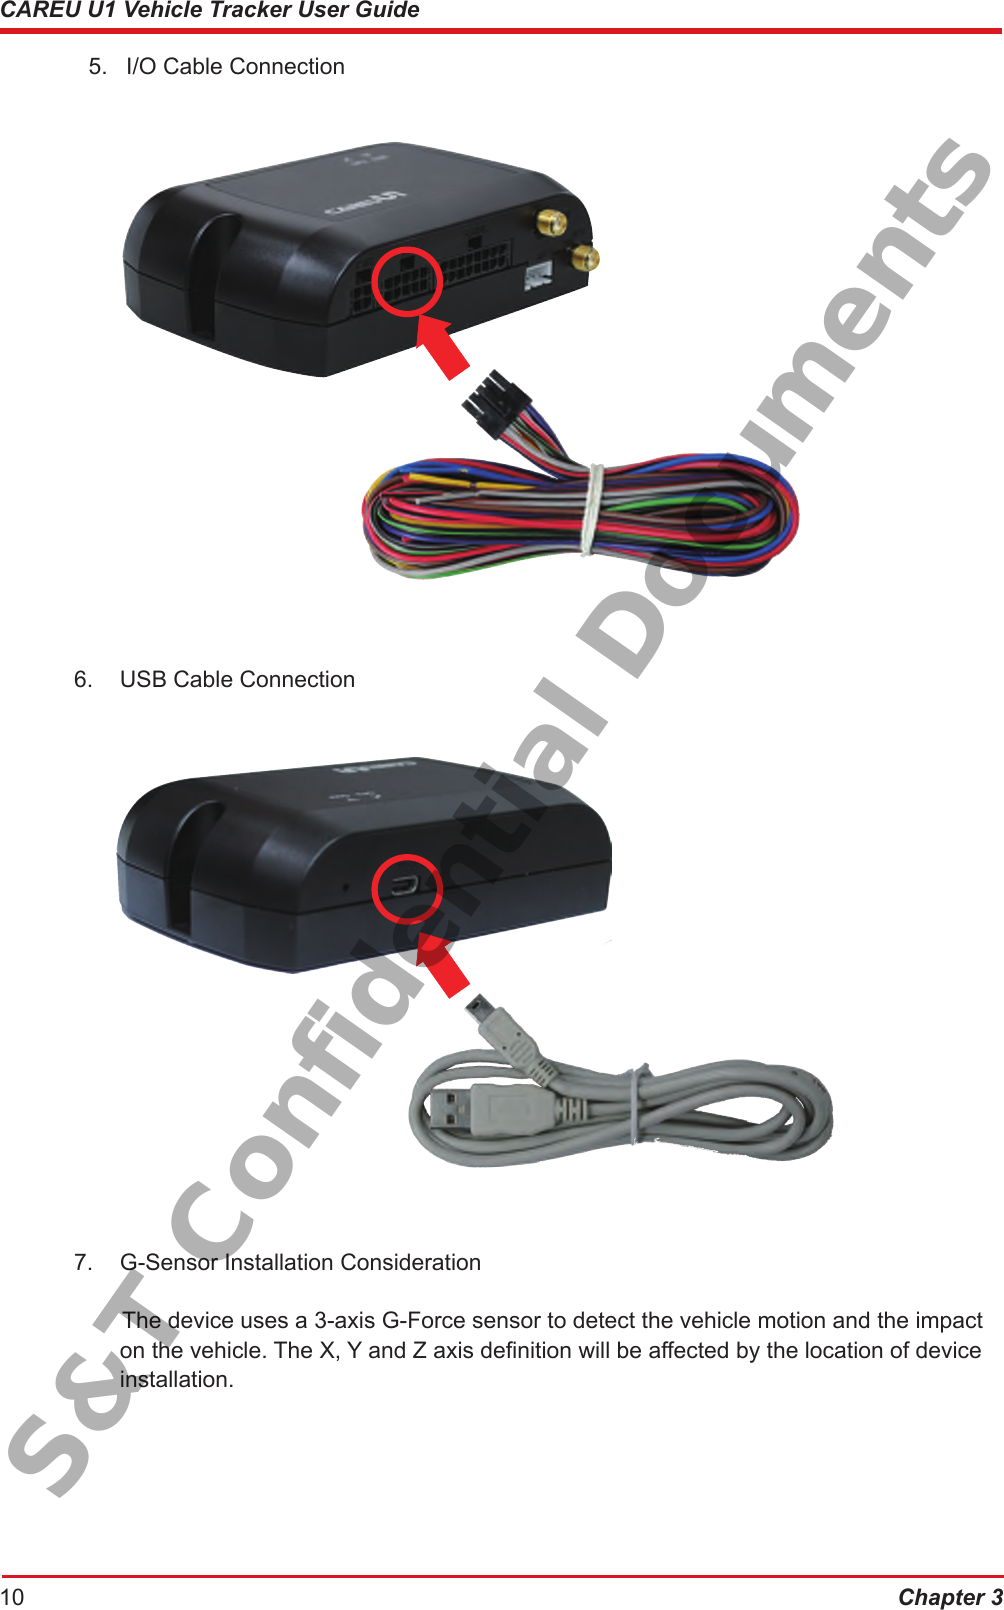 Chapter 310CAREU U1 Vehicle Tracker User Guide  5.  I/O Cable Connection6.  USB Cable Connection7.  G-Sensor Installation ConsiderationThe device uses a 3-axis G-Force sensor to detect the vehicle motion and the impact    on the vehicle. The X, Y and Z axis denition will be affected by the location of device    installation.S&amp;T Confidential Documents